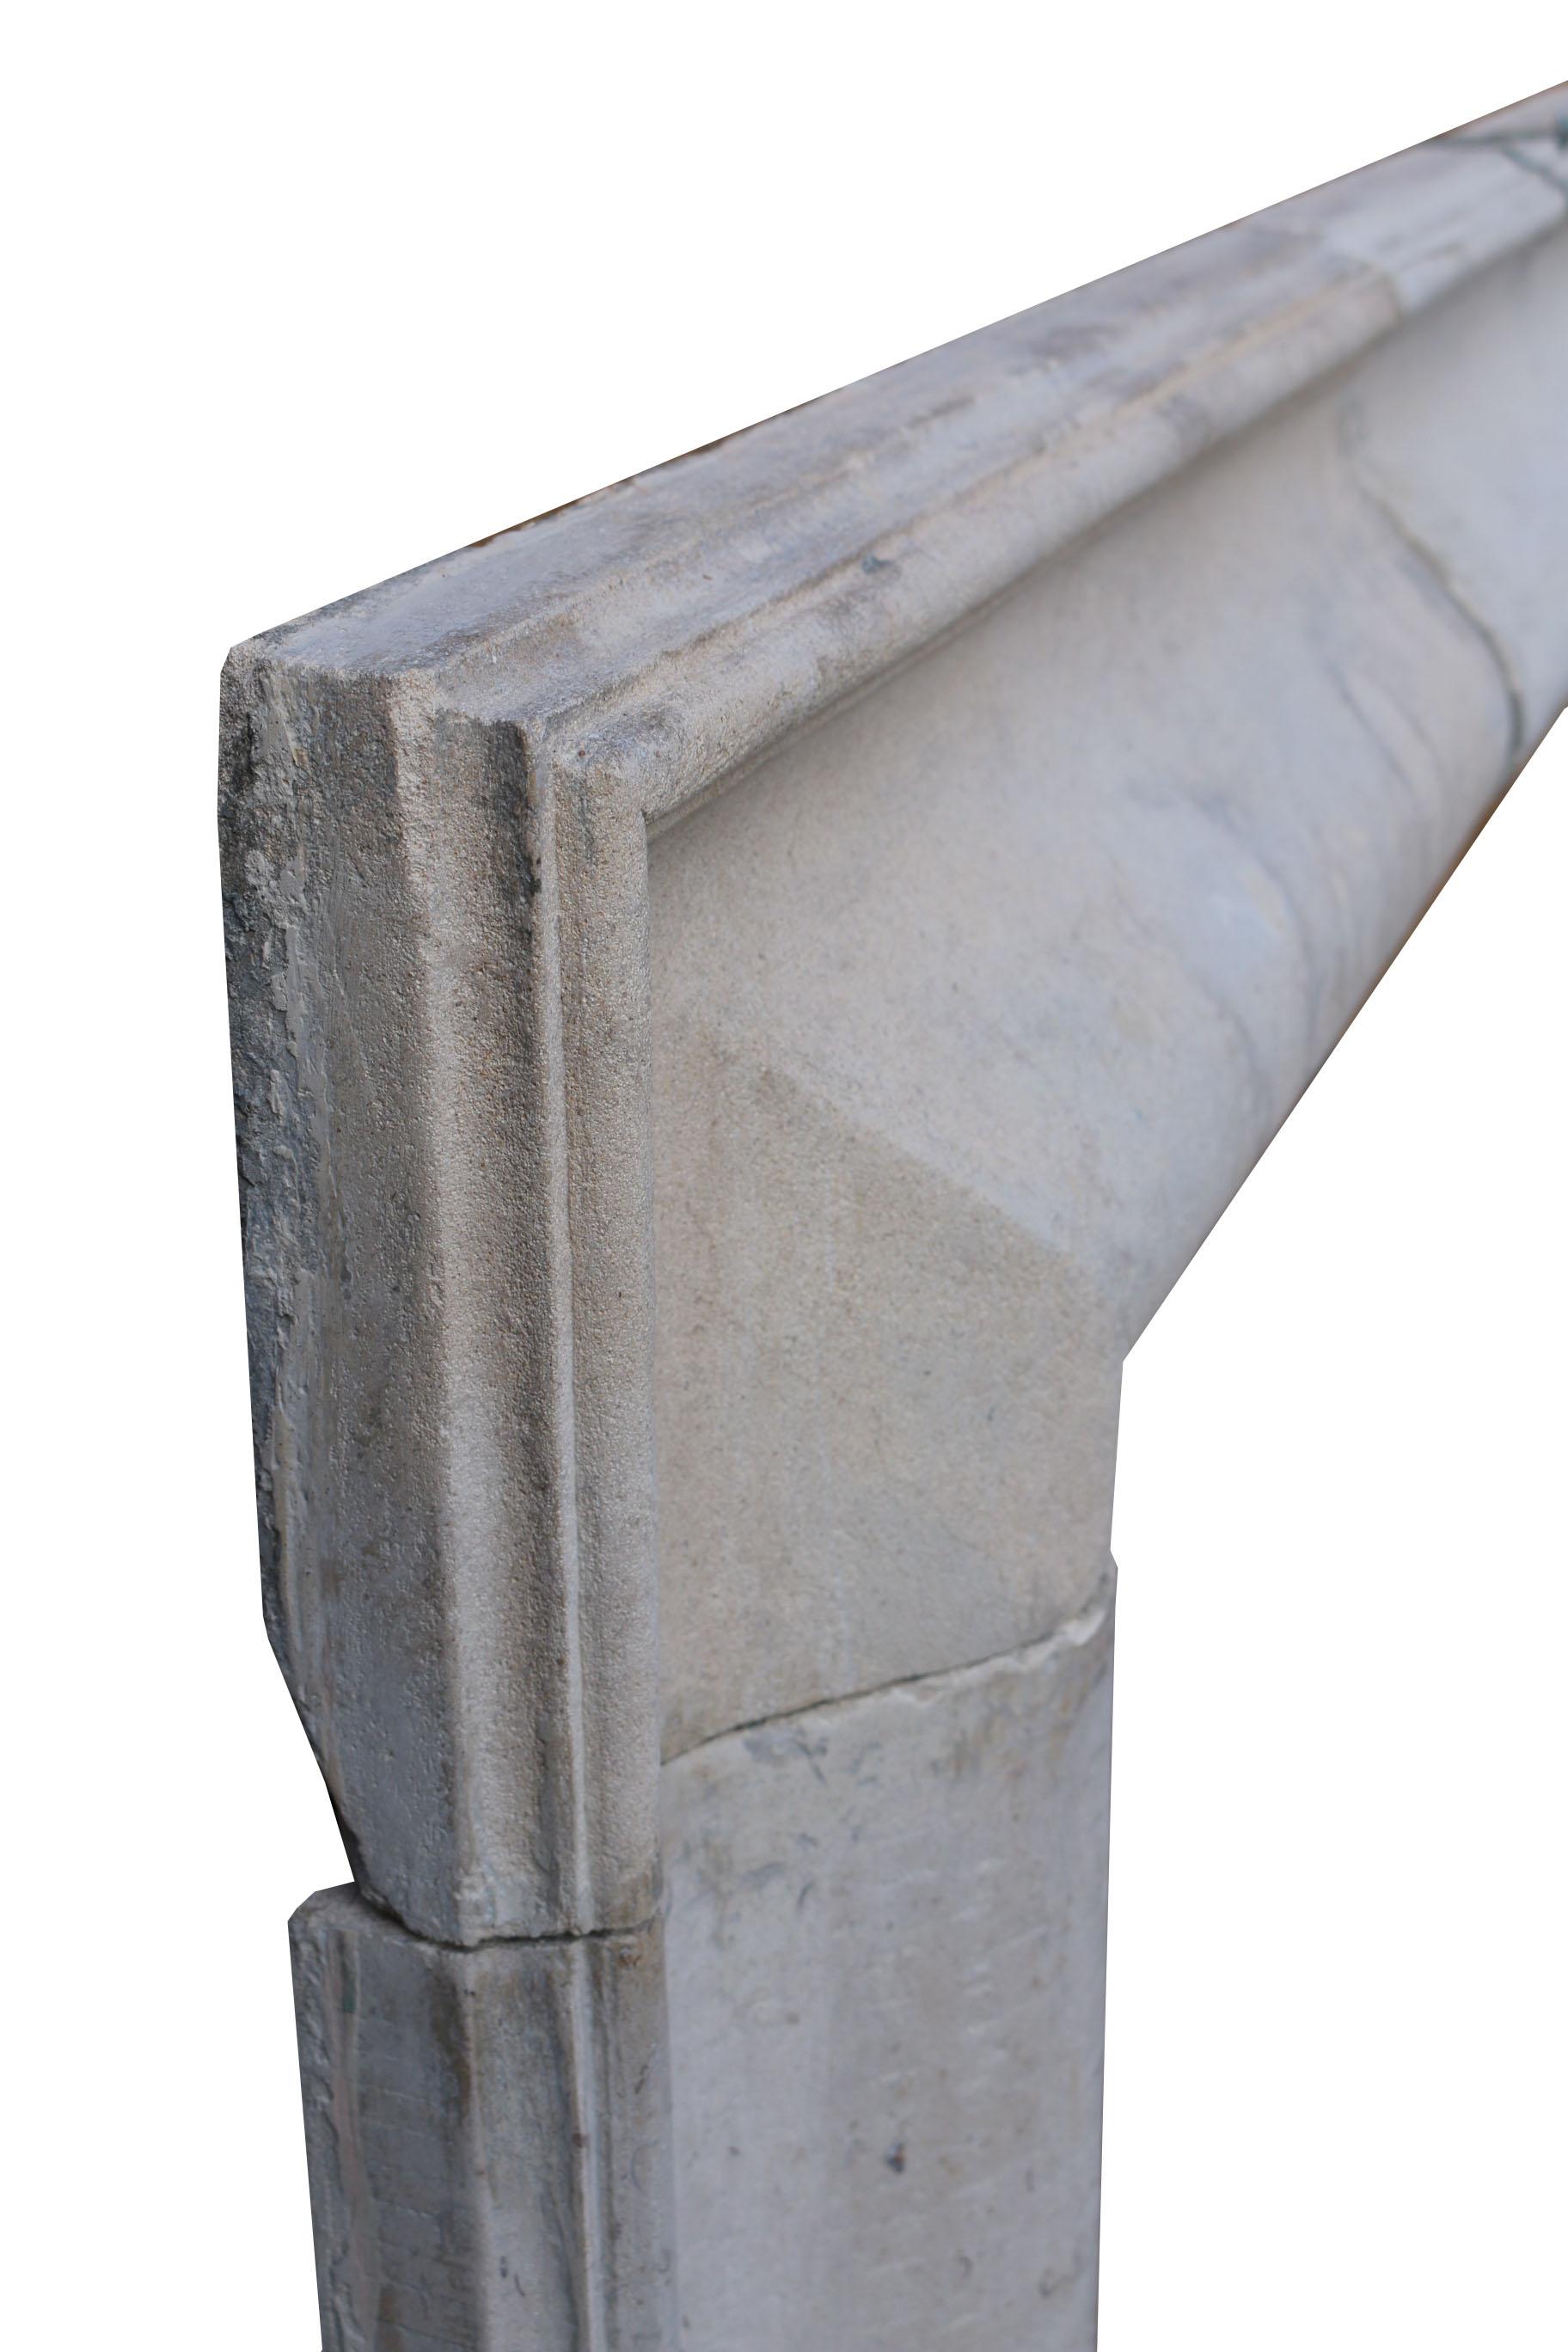 Carved Early 19th Century English Cotswold Limestone Bolection Fire Surround